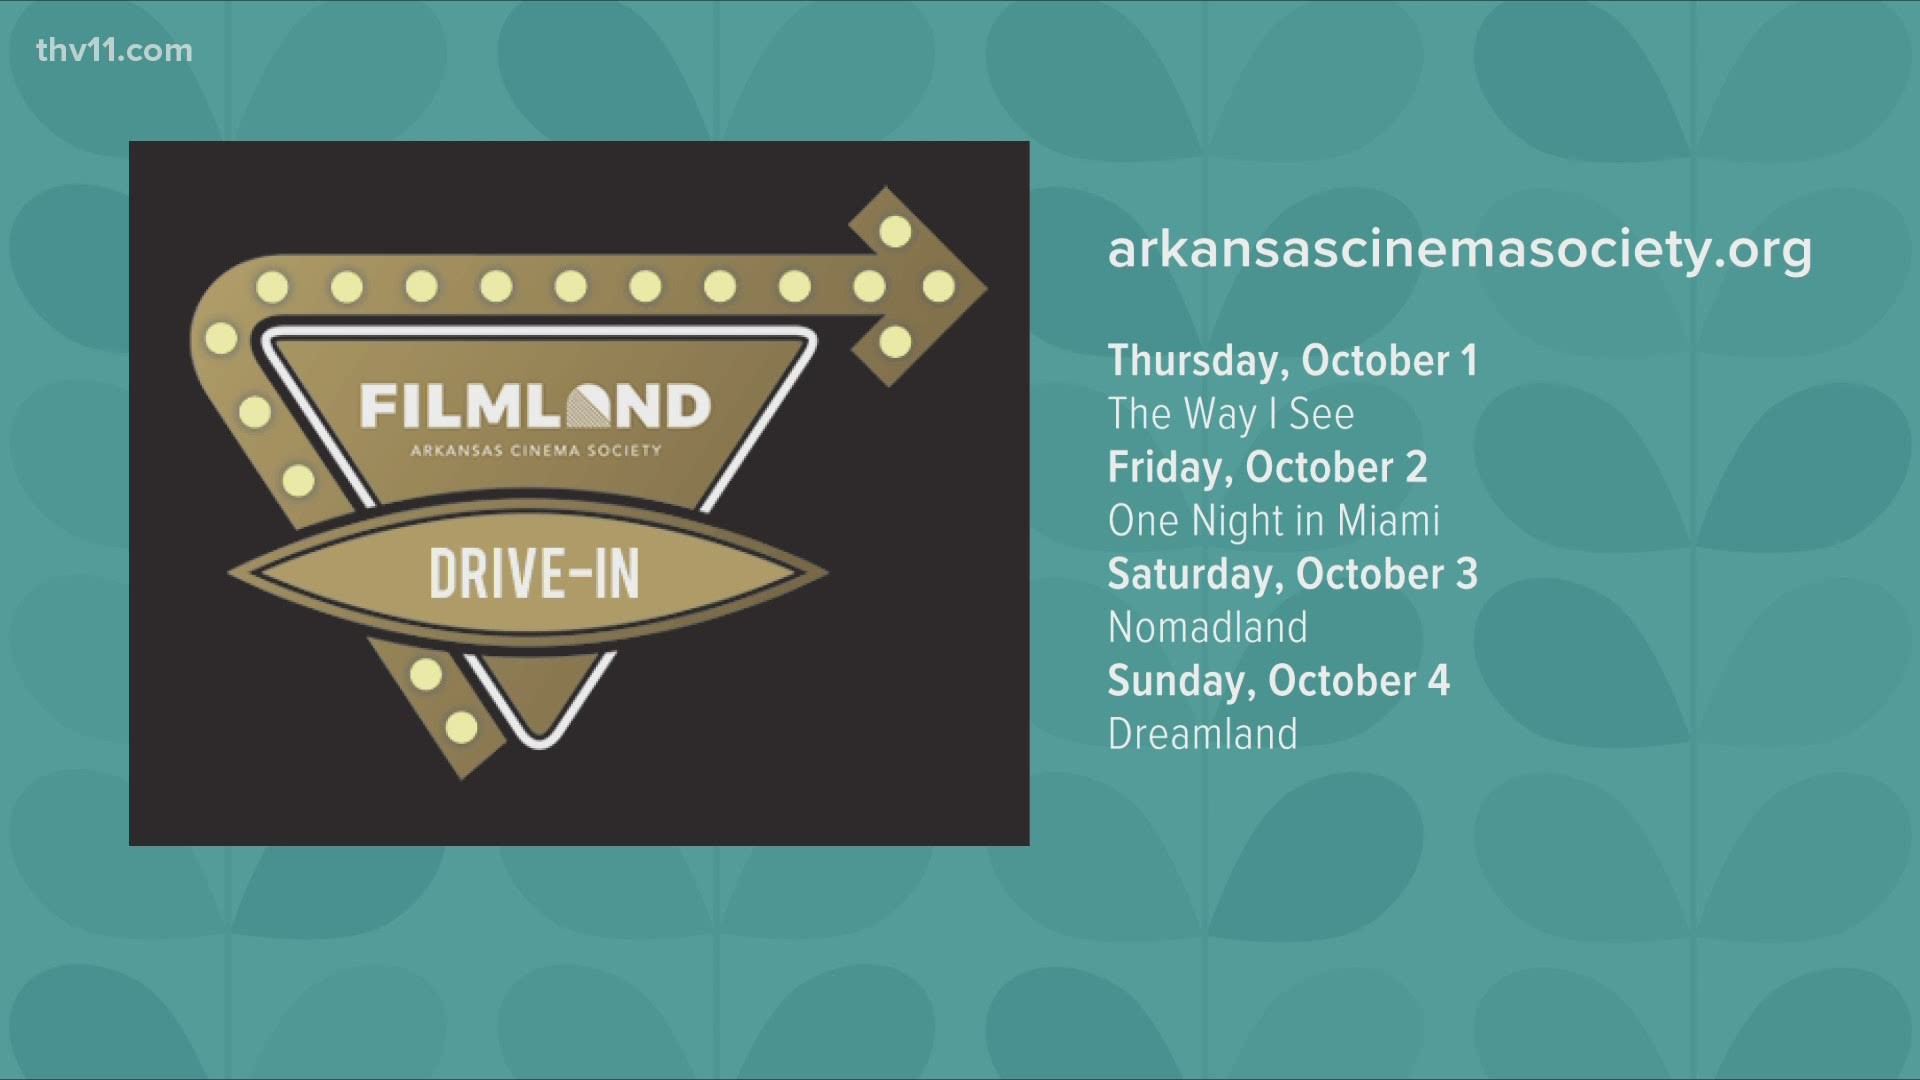 Arkansas Cinema Society's Filmland 2020 will be a drive-in film festival. It will run October 1-4 and offer additional digital experience options for members only.